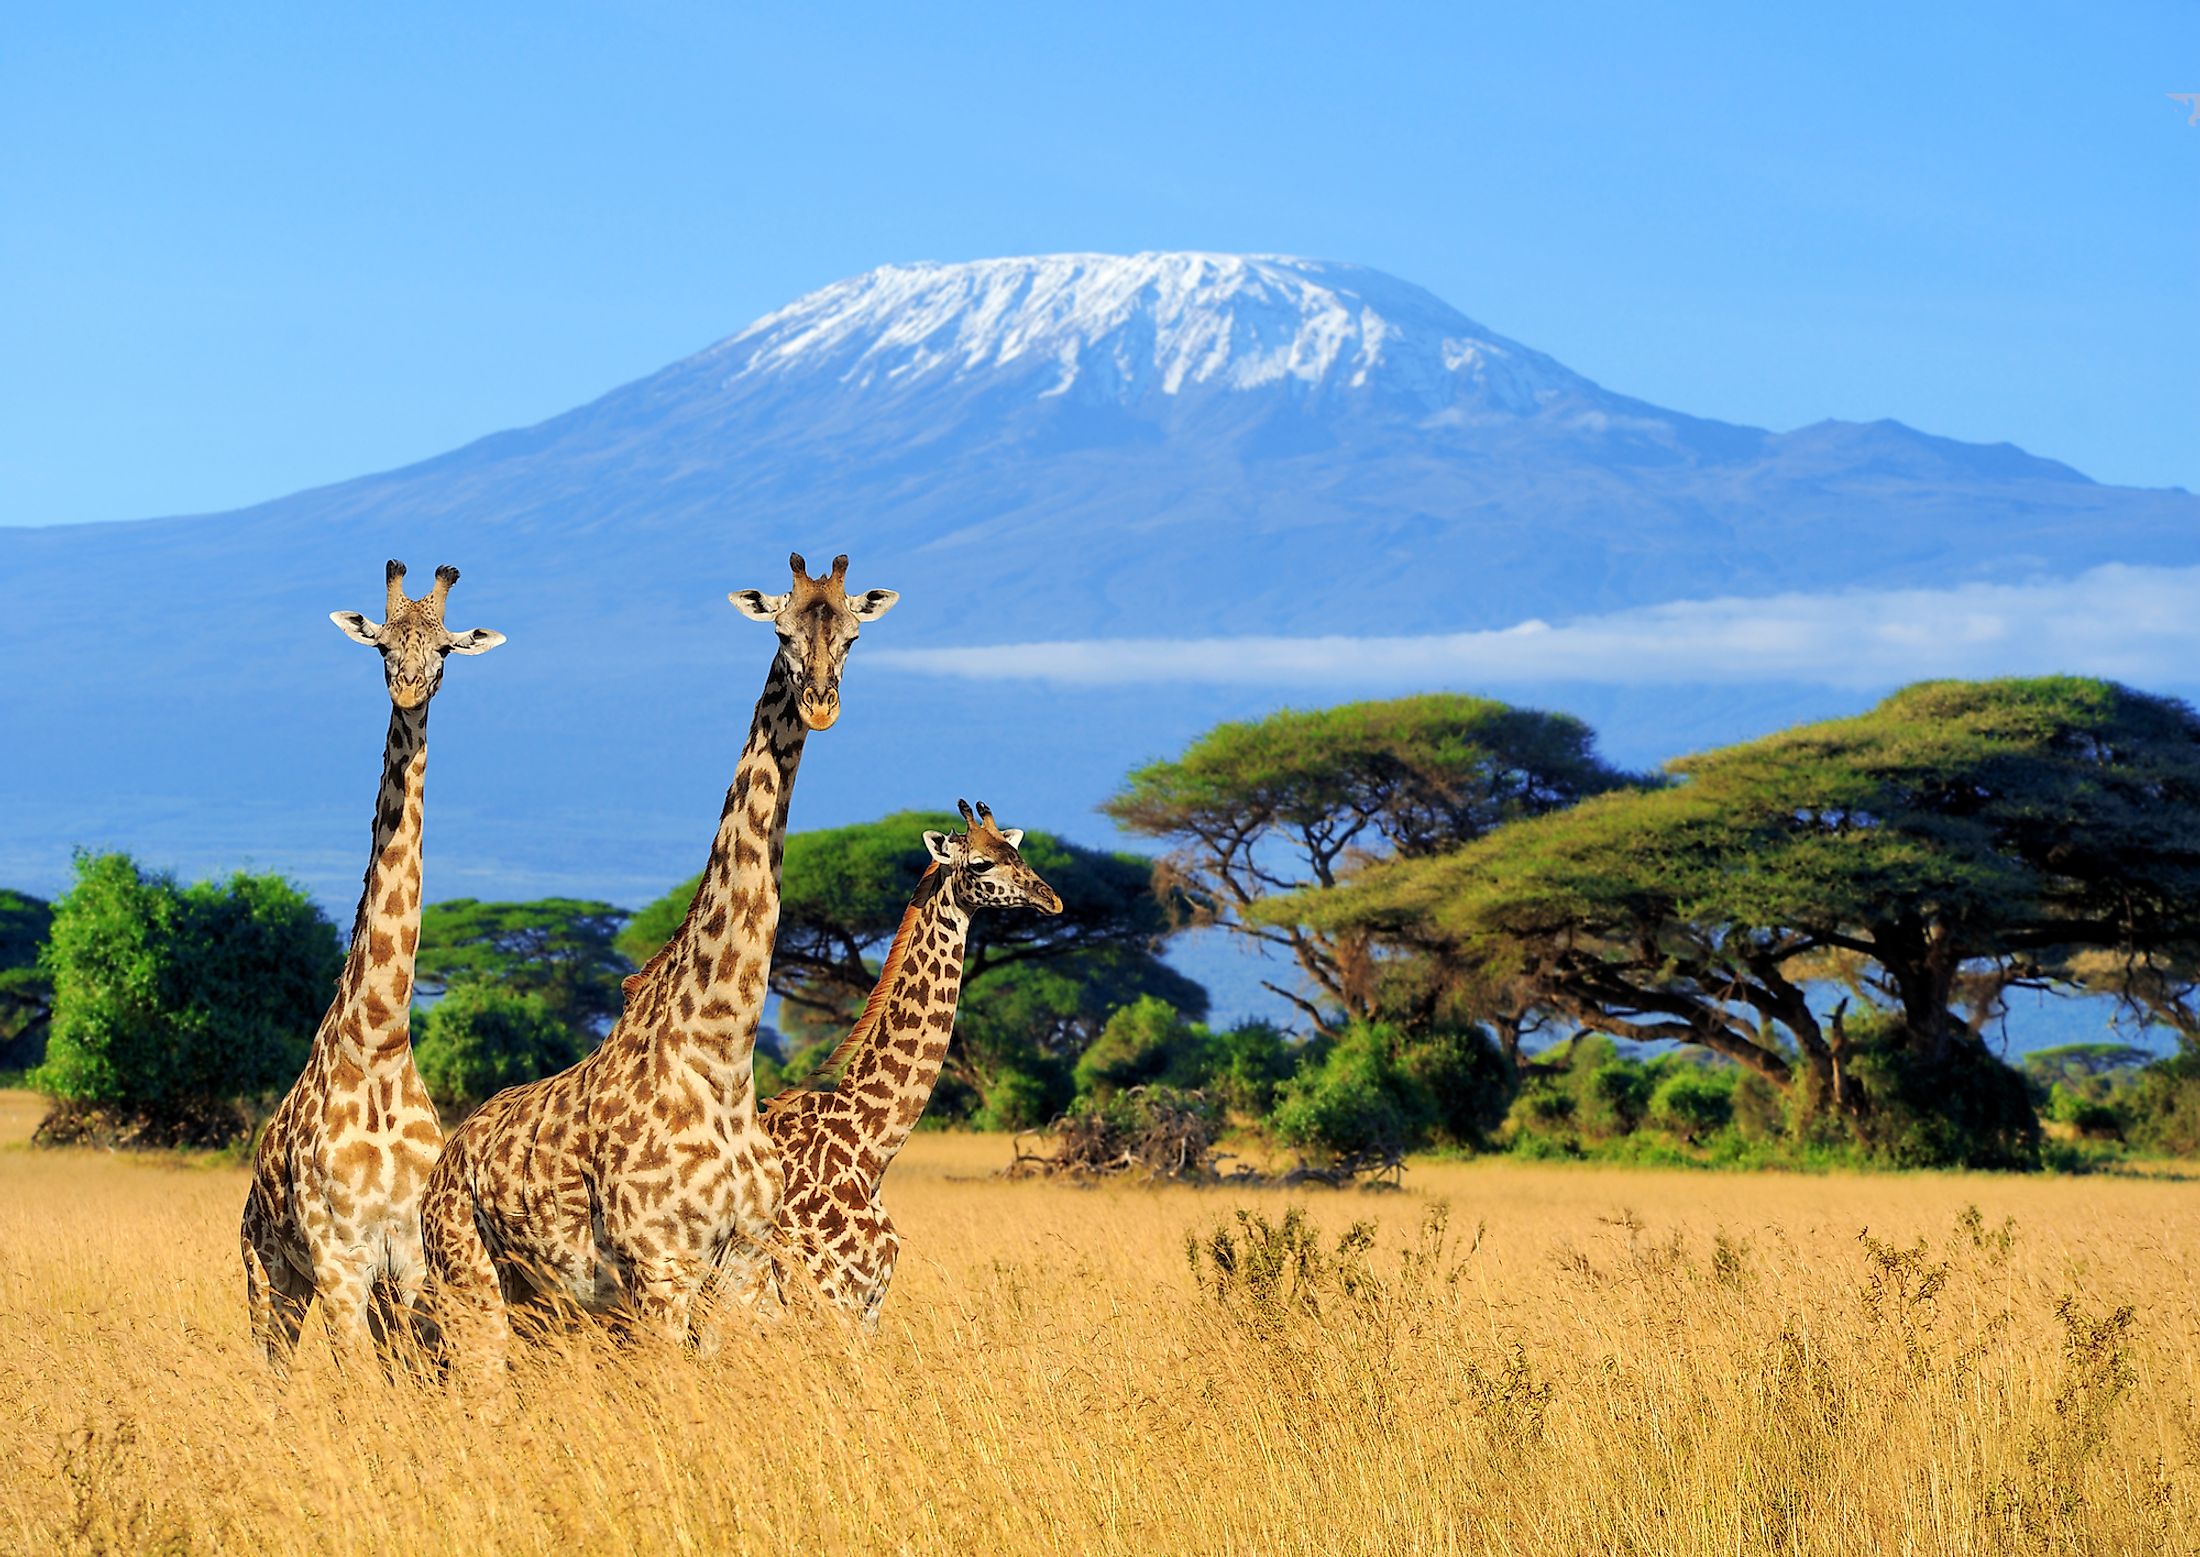 Giraffes in a Kenyan national park with Mount Kilimanjaro in the background.